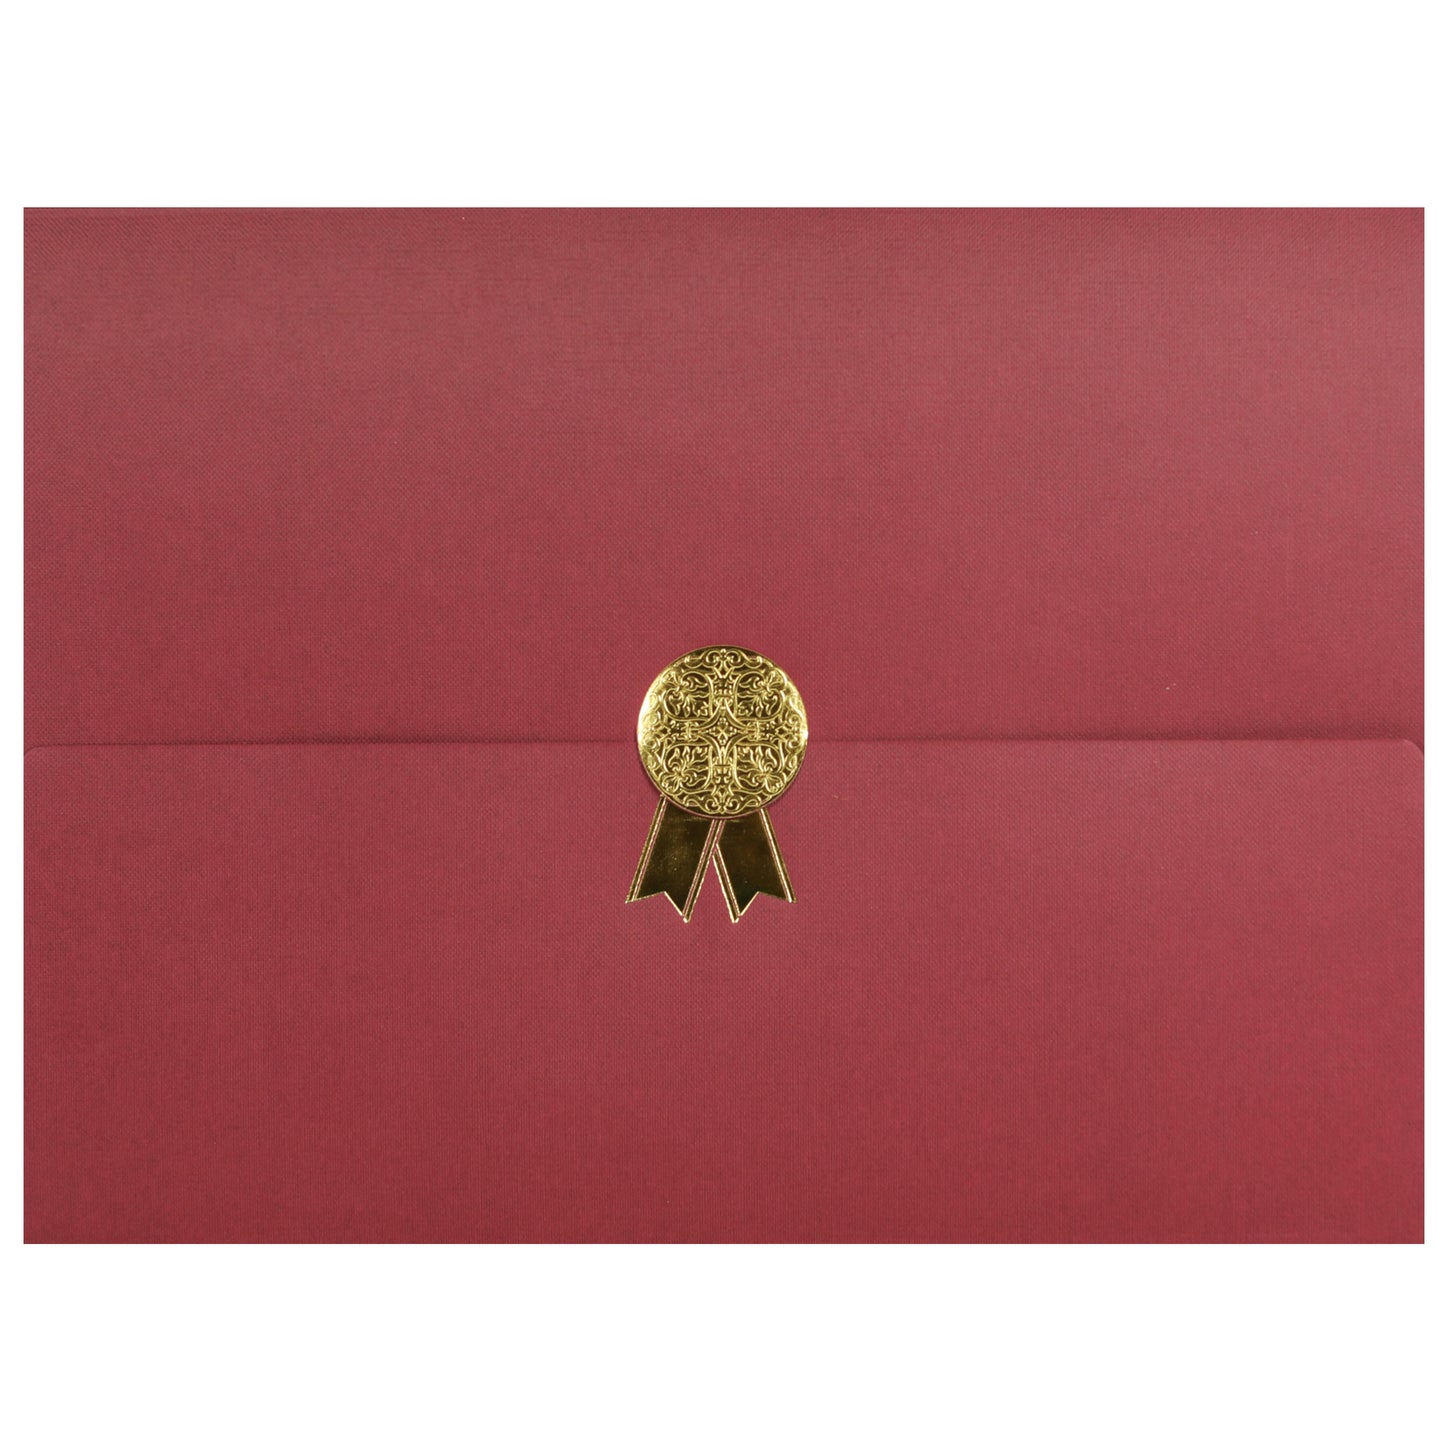 St. James® Certificate Holders/Document Covers/Diploma Holders, Burgundy, Gold Award Seal with Gold Ribbon, Pack of 5, 83819